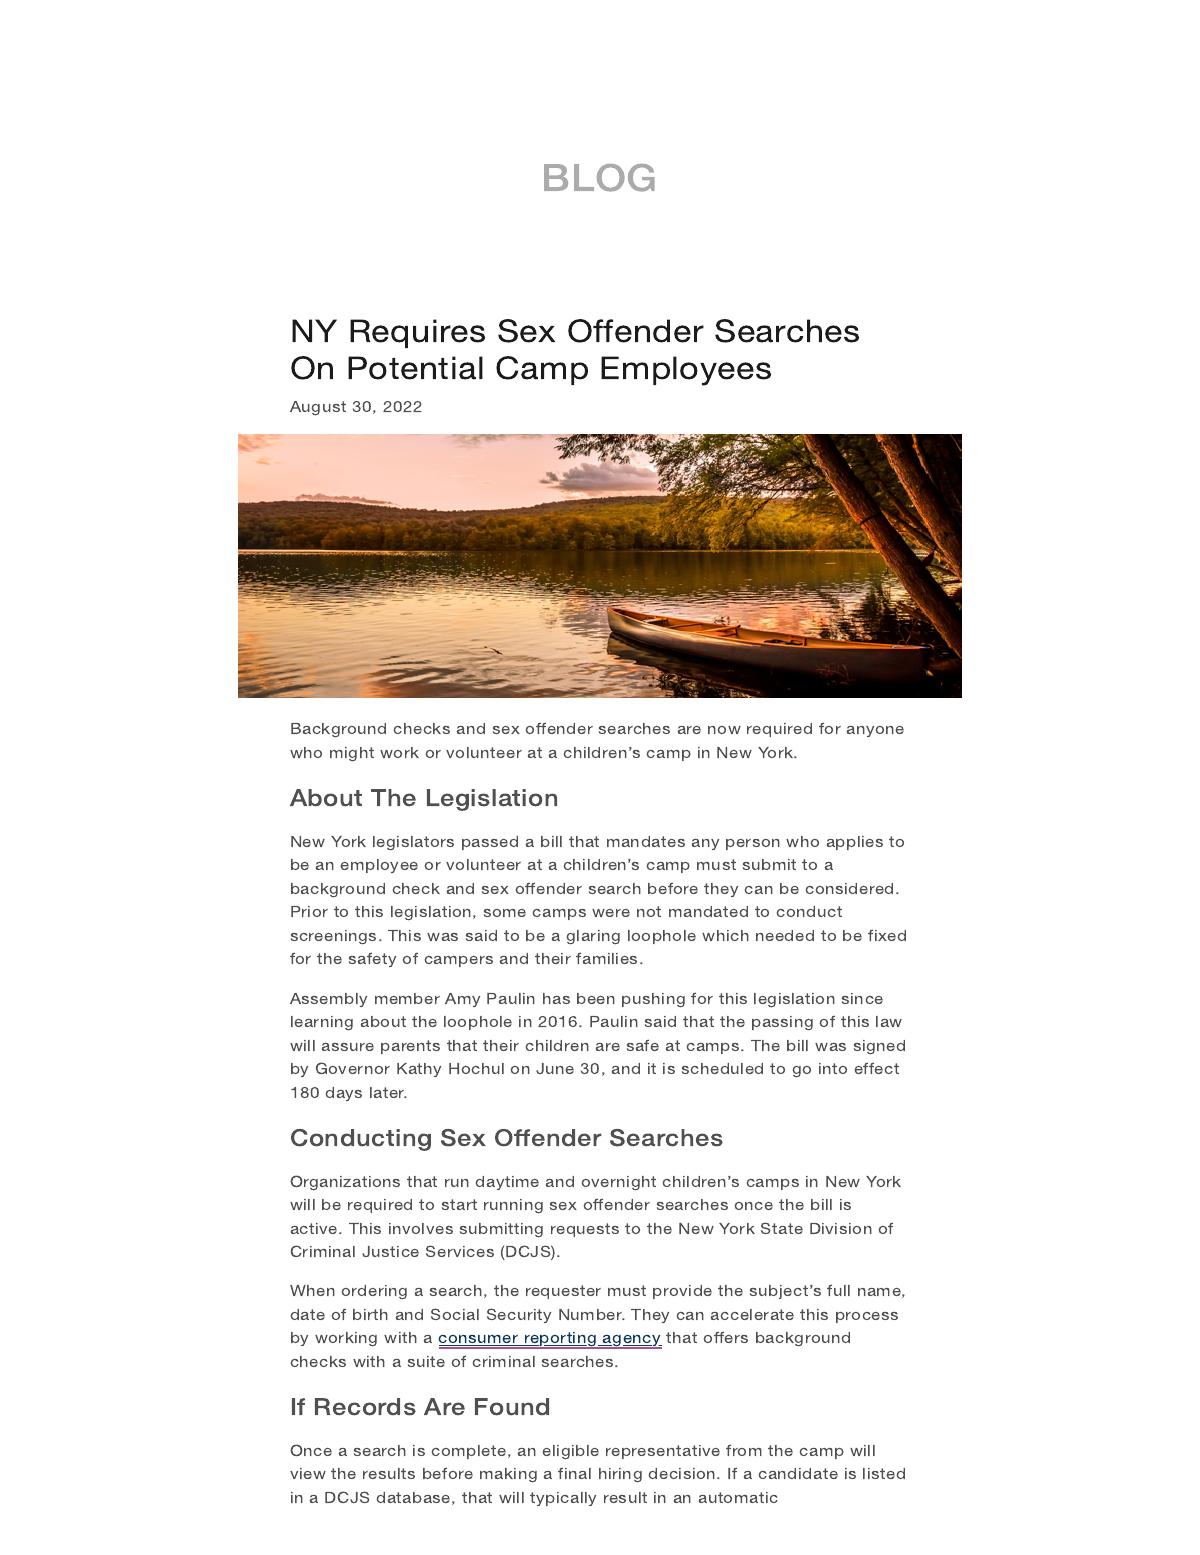 NY Requires Sex Offender Searches On Potential Camp Employees - Backgrounds Online BLOG